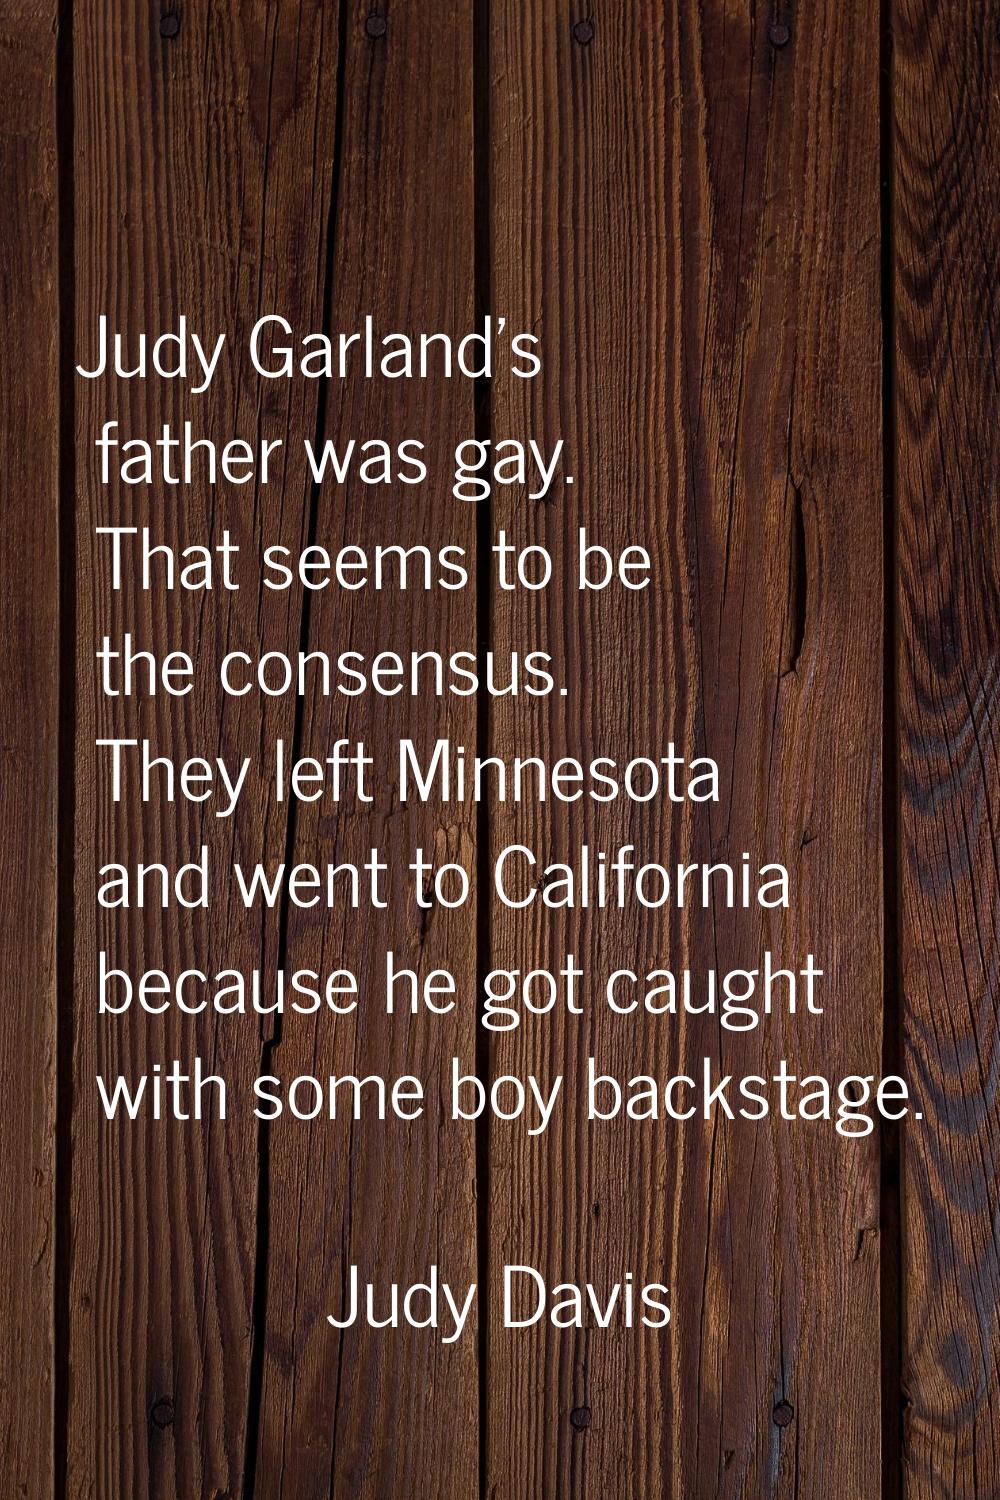 Judy Garland's father was gay. That seems to be the consensus. They left Minnesota and went to Cali